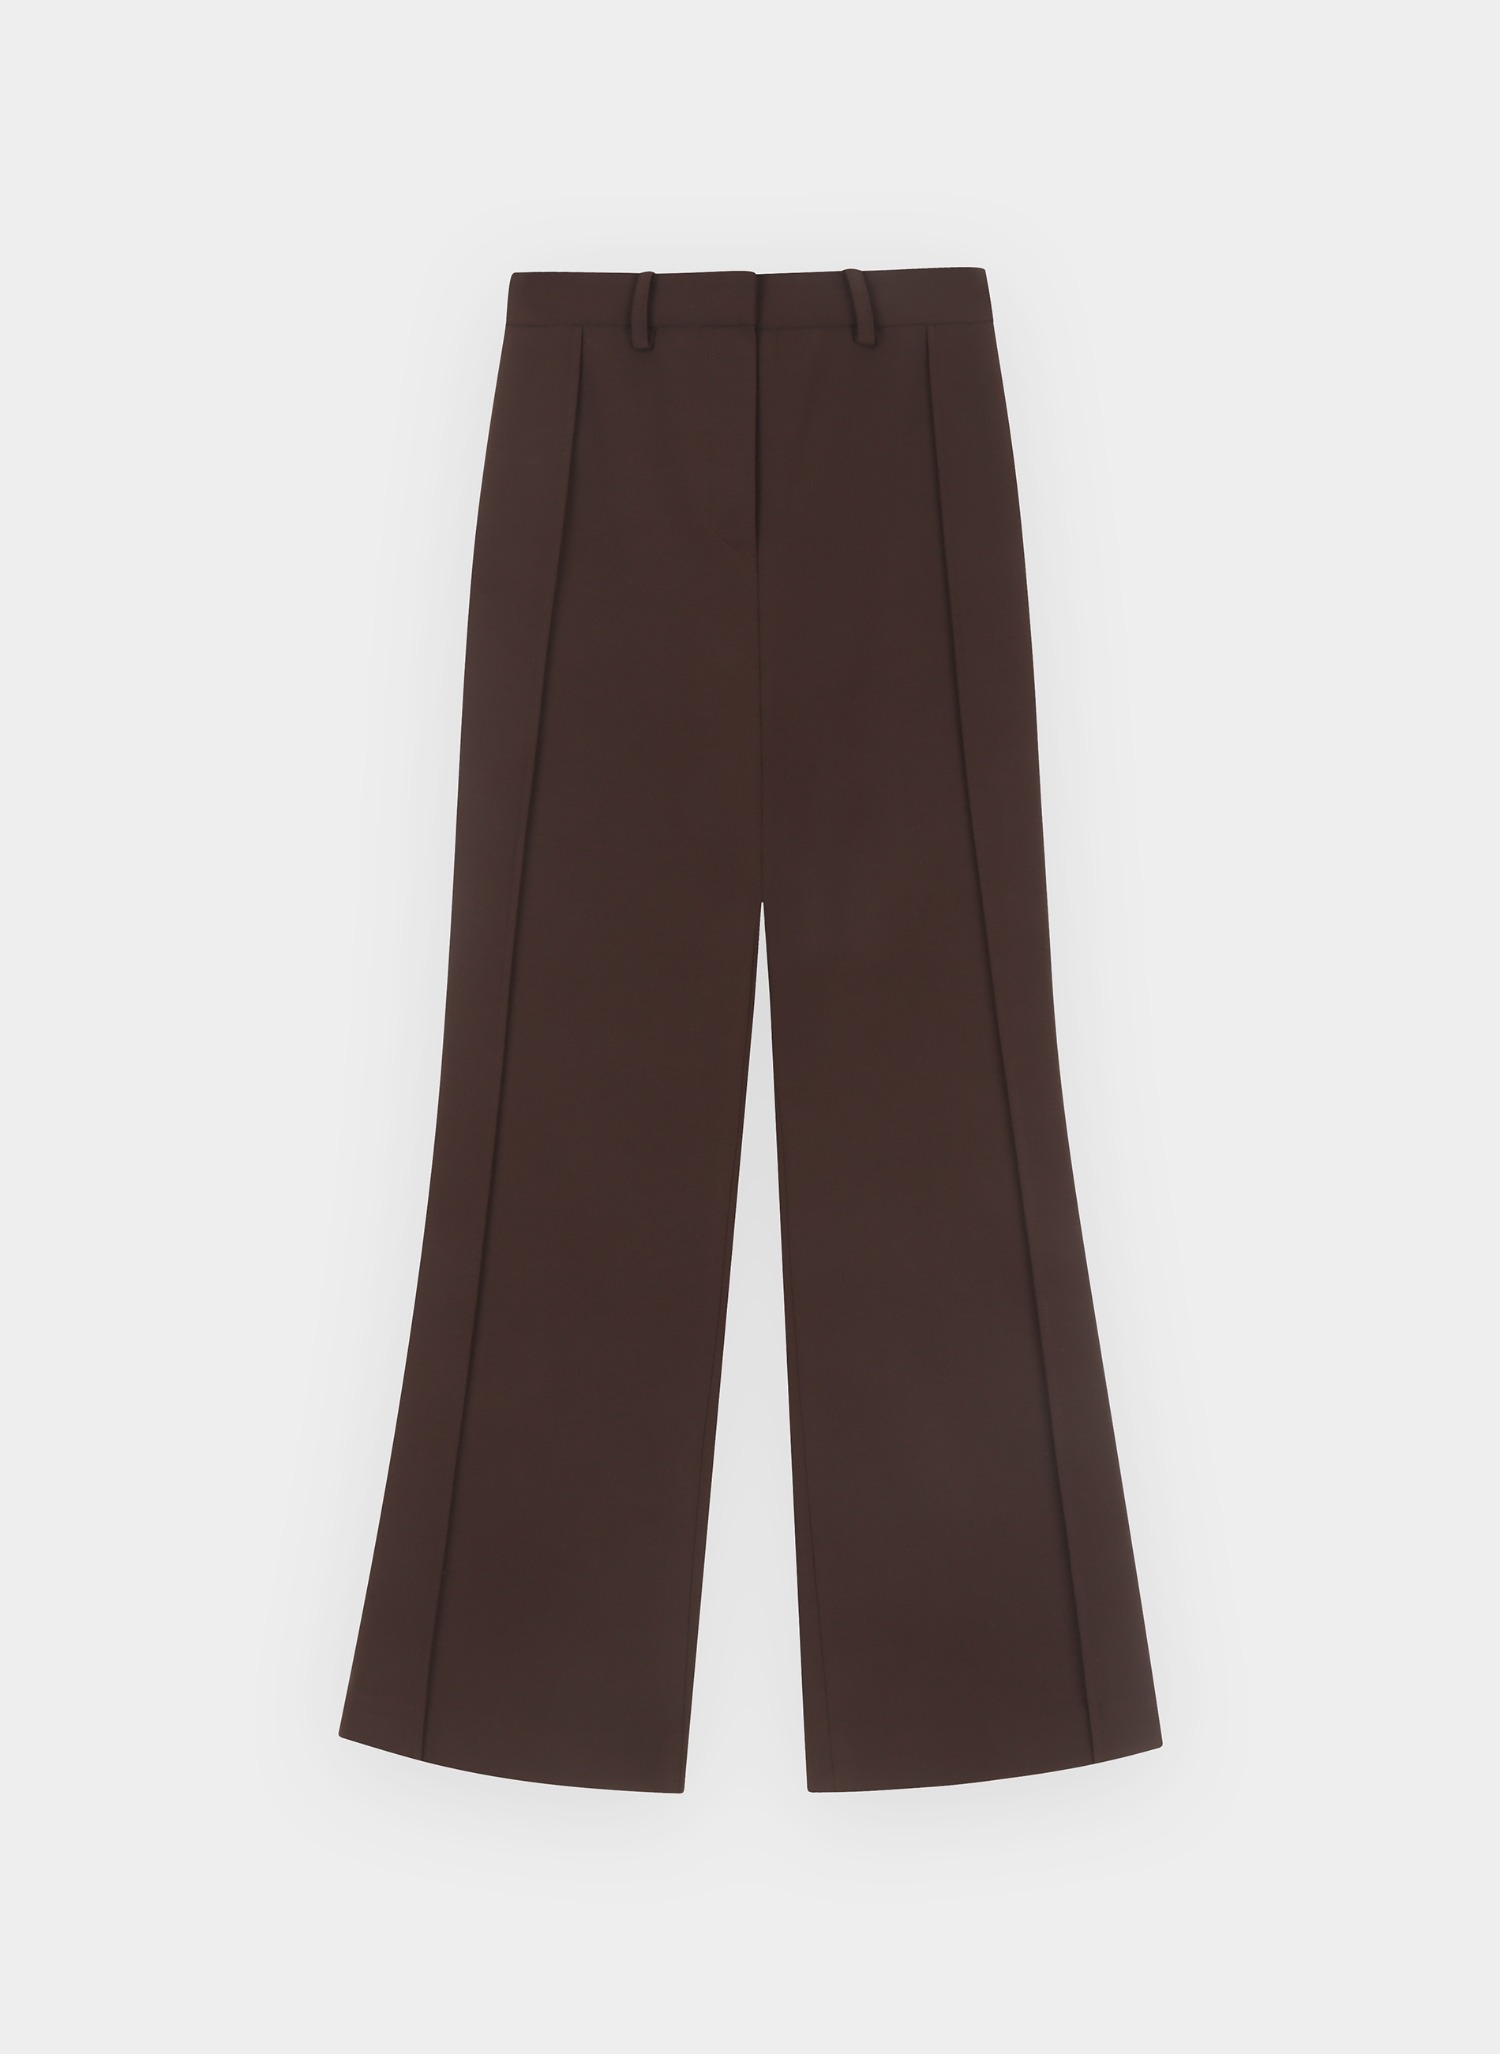 Lined Boots Cut Trousers Brown